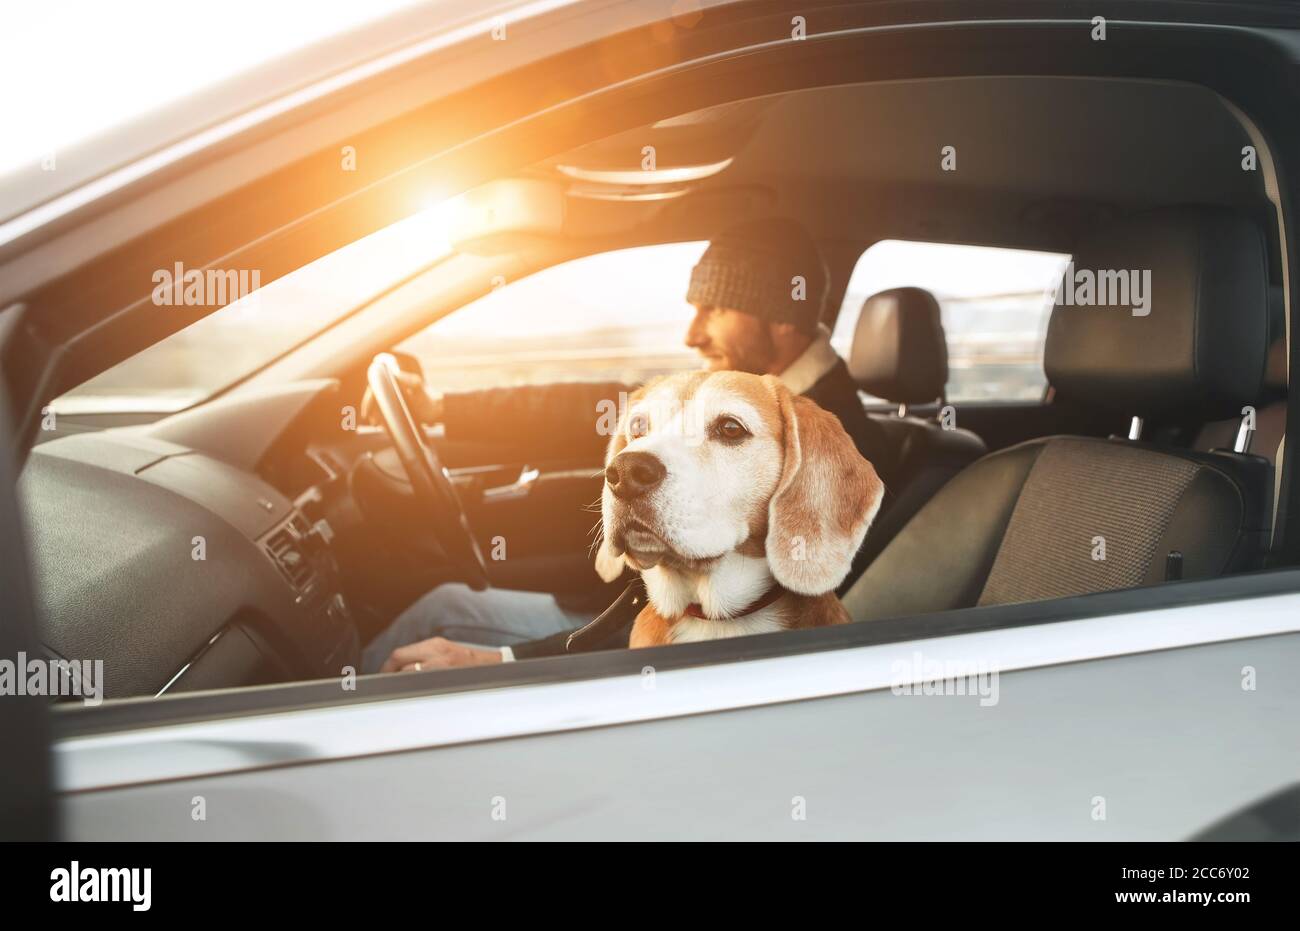 Warm dressed man enjoying the modern car driving with his beagle dog sitting on the co-driver passenger seat. Funny pets concept image. Stock Photo